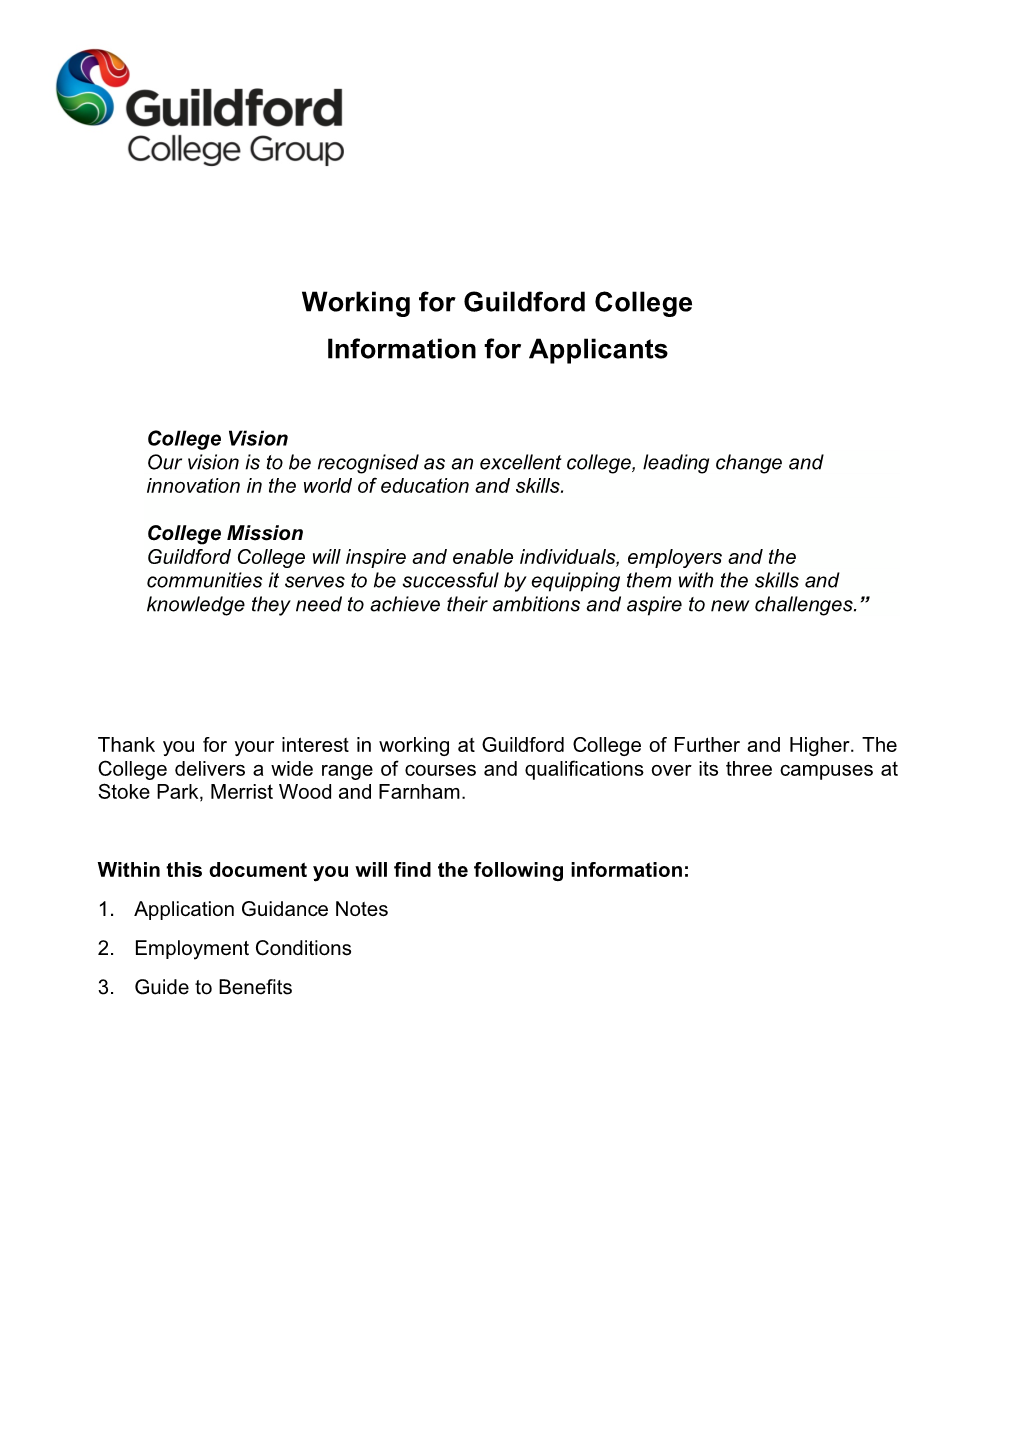 Working for Guildford College Information for Applicants